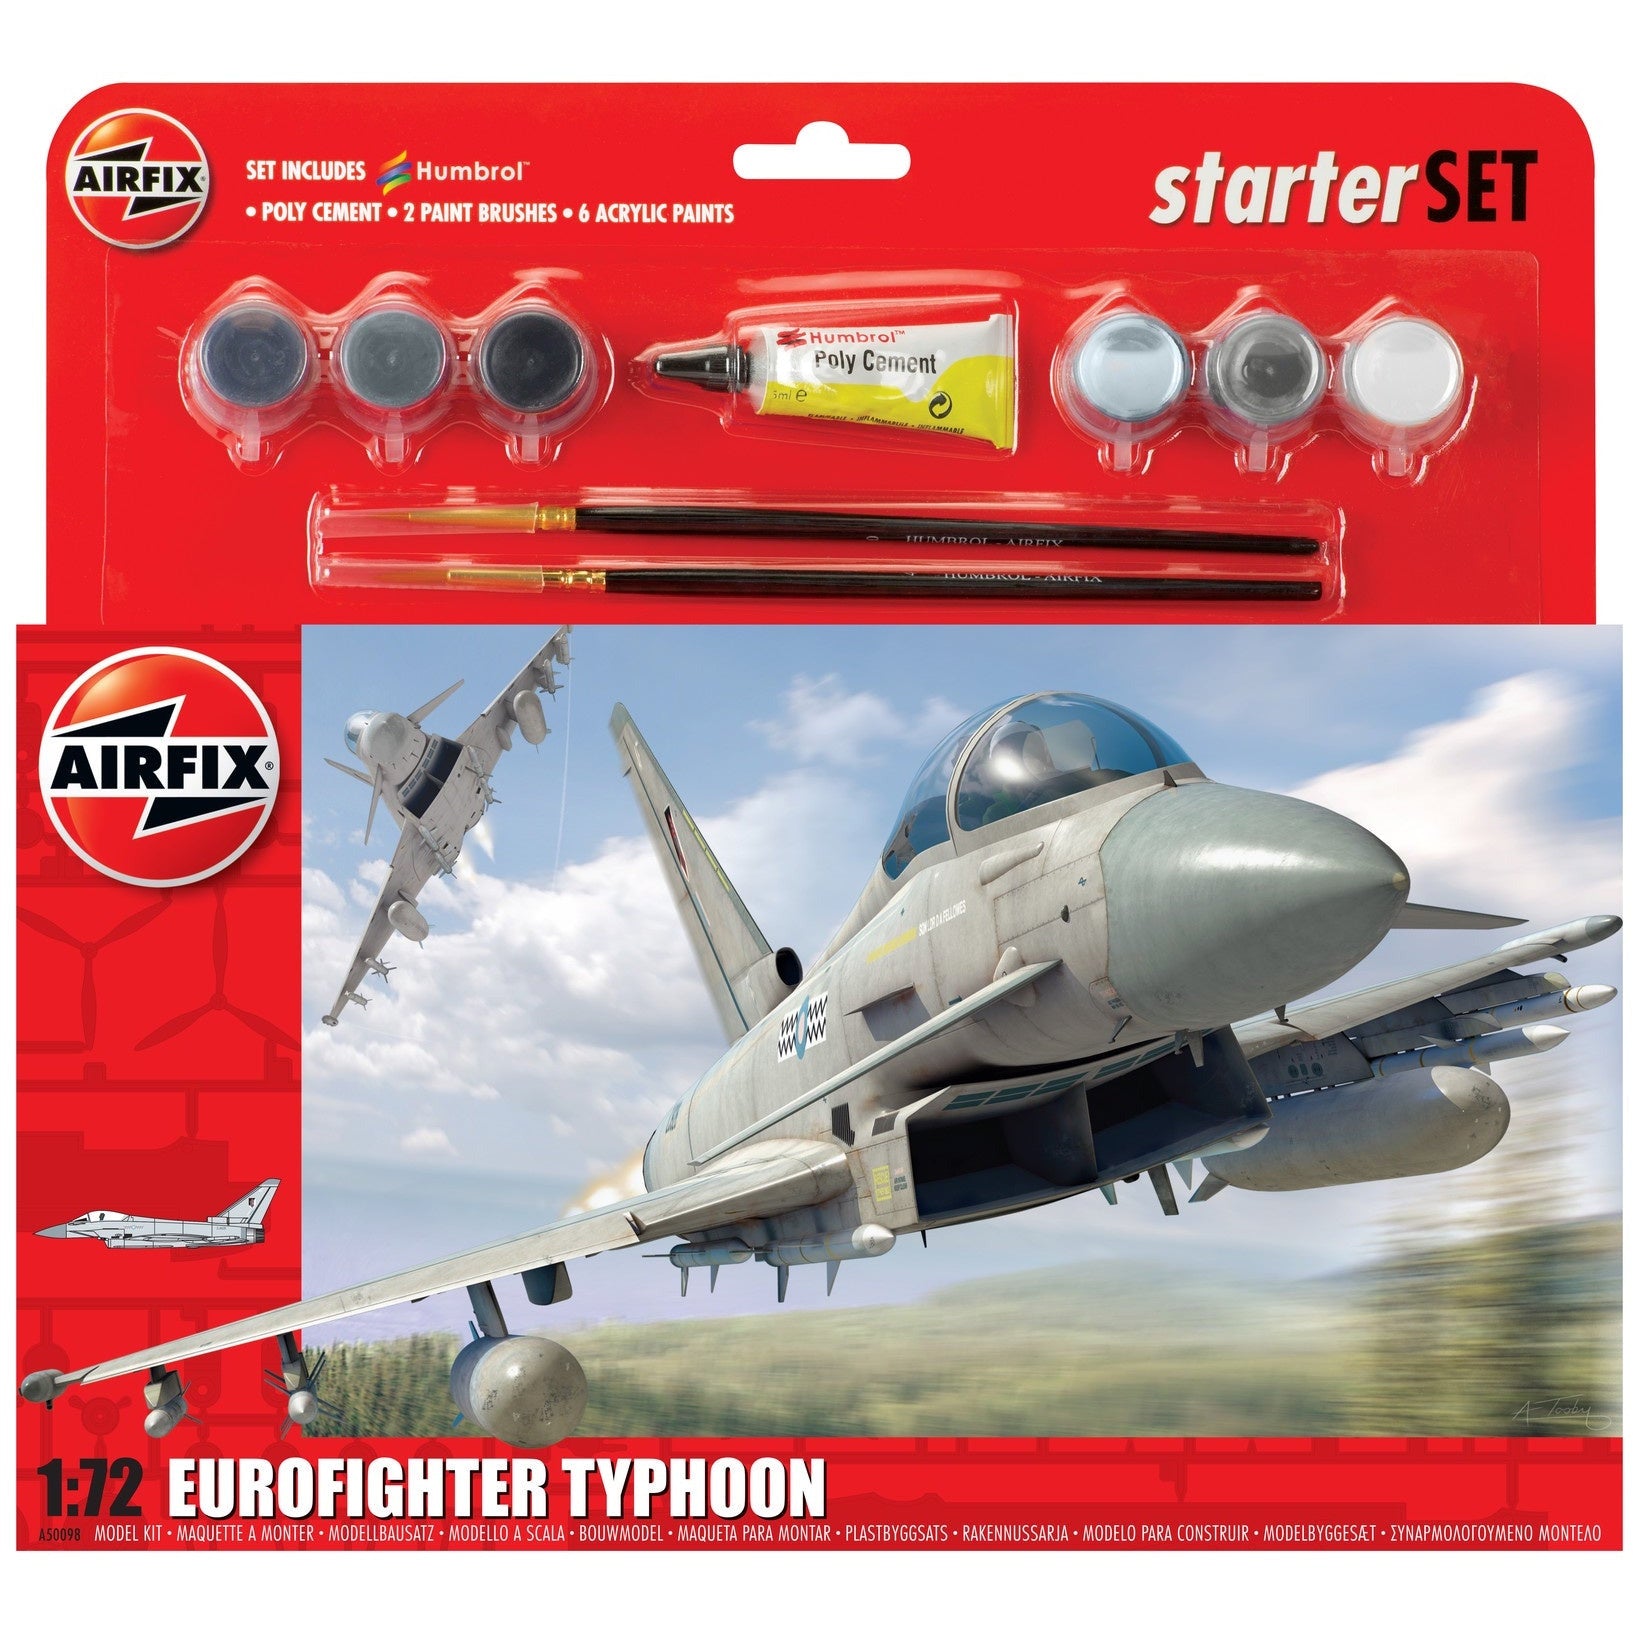 Eurofighter Typhoon 1/72 #50098A by Airfix